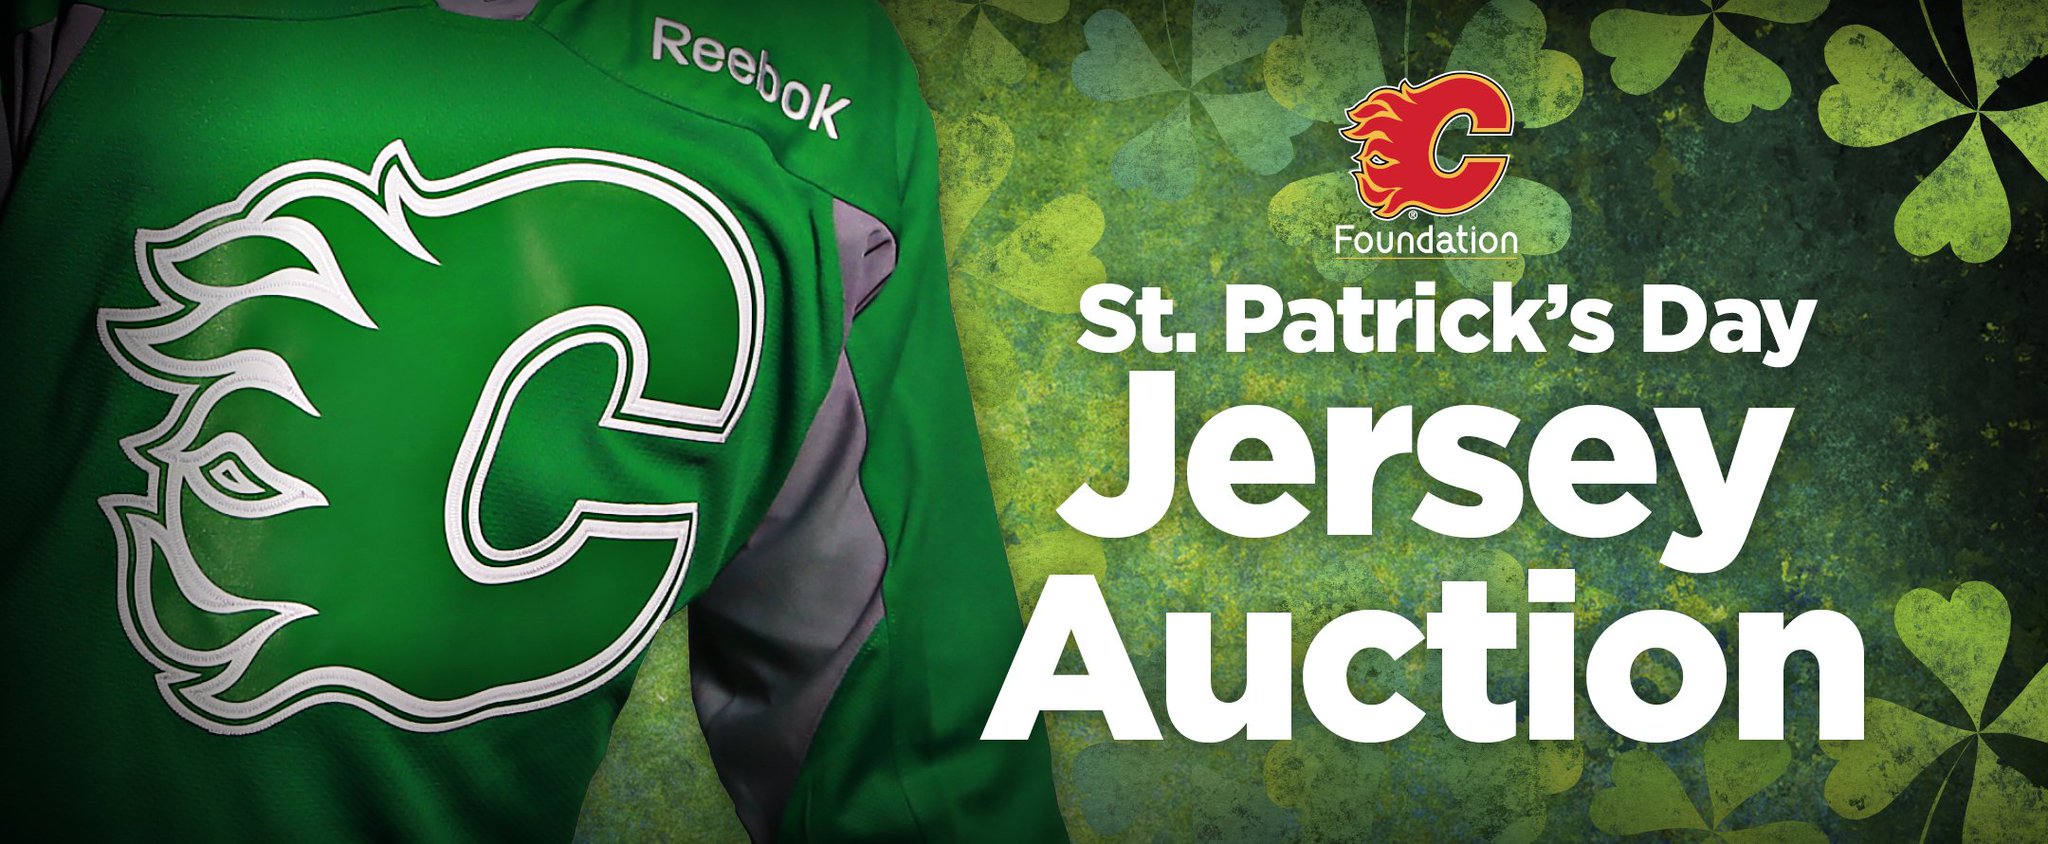 calgary flames st patrick's day jersey